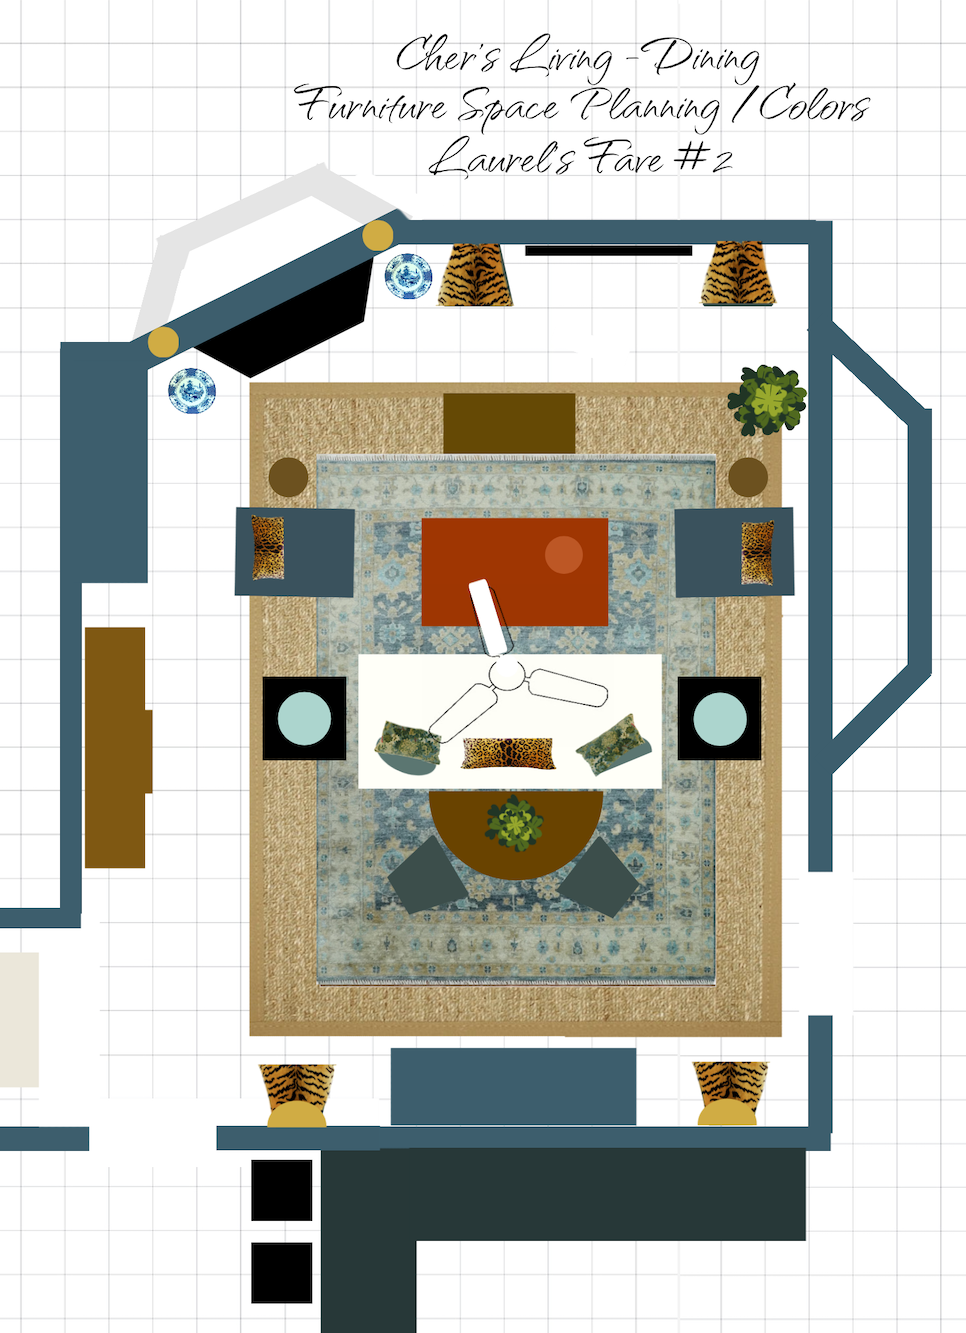 Cher's living dining room layout - space planning - colors white sofa - seagrass rug, teal oushak rug 